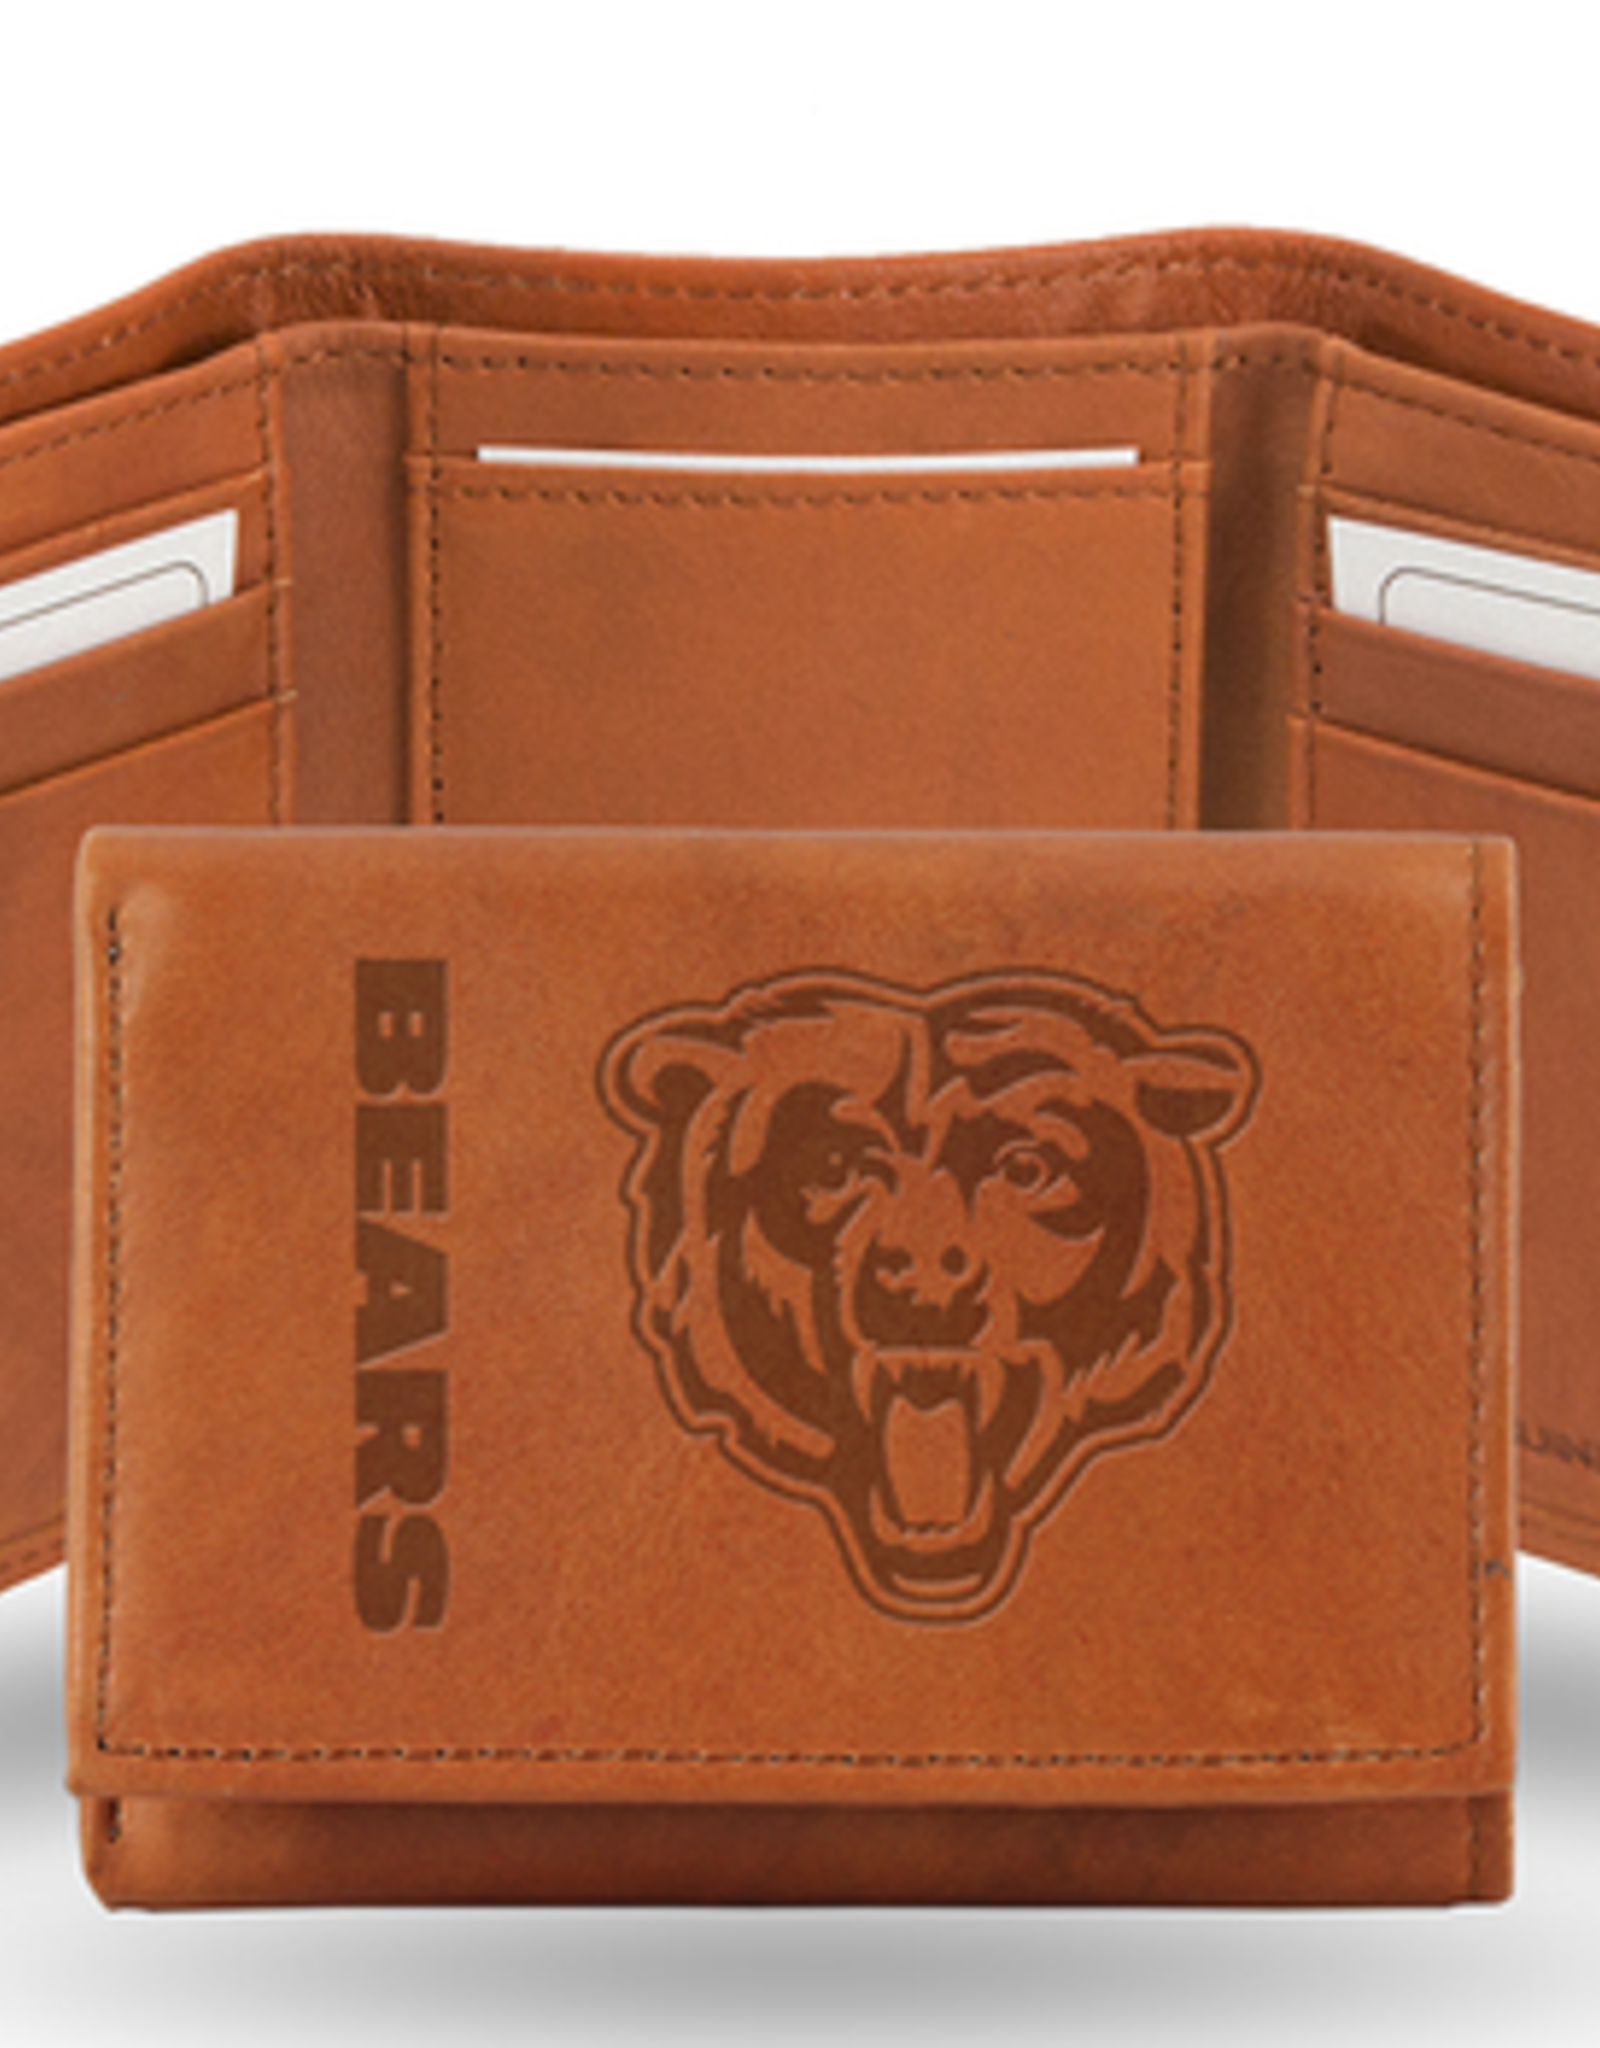 RICO INDUSTRIES Chicago Bears Vintage Leather Trifold Wallet